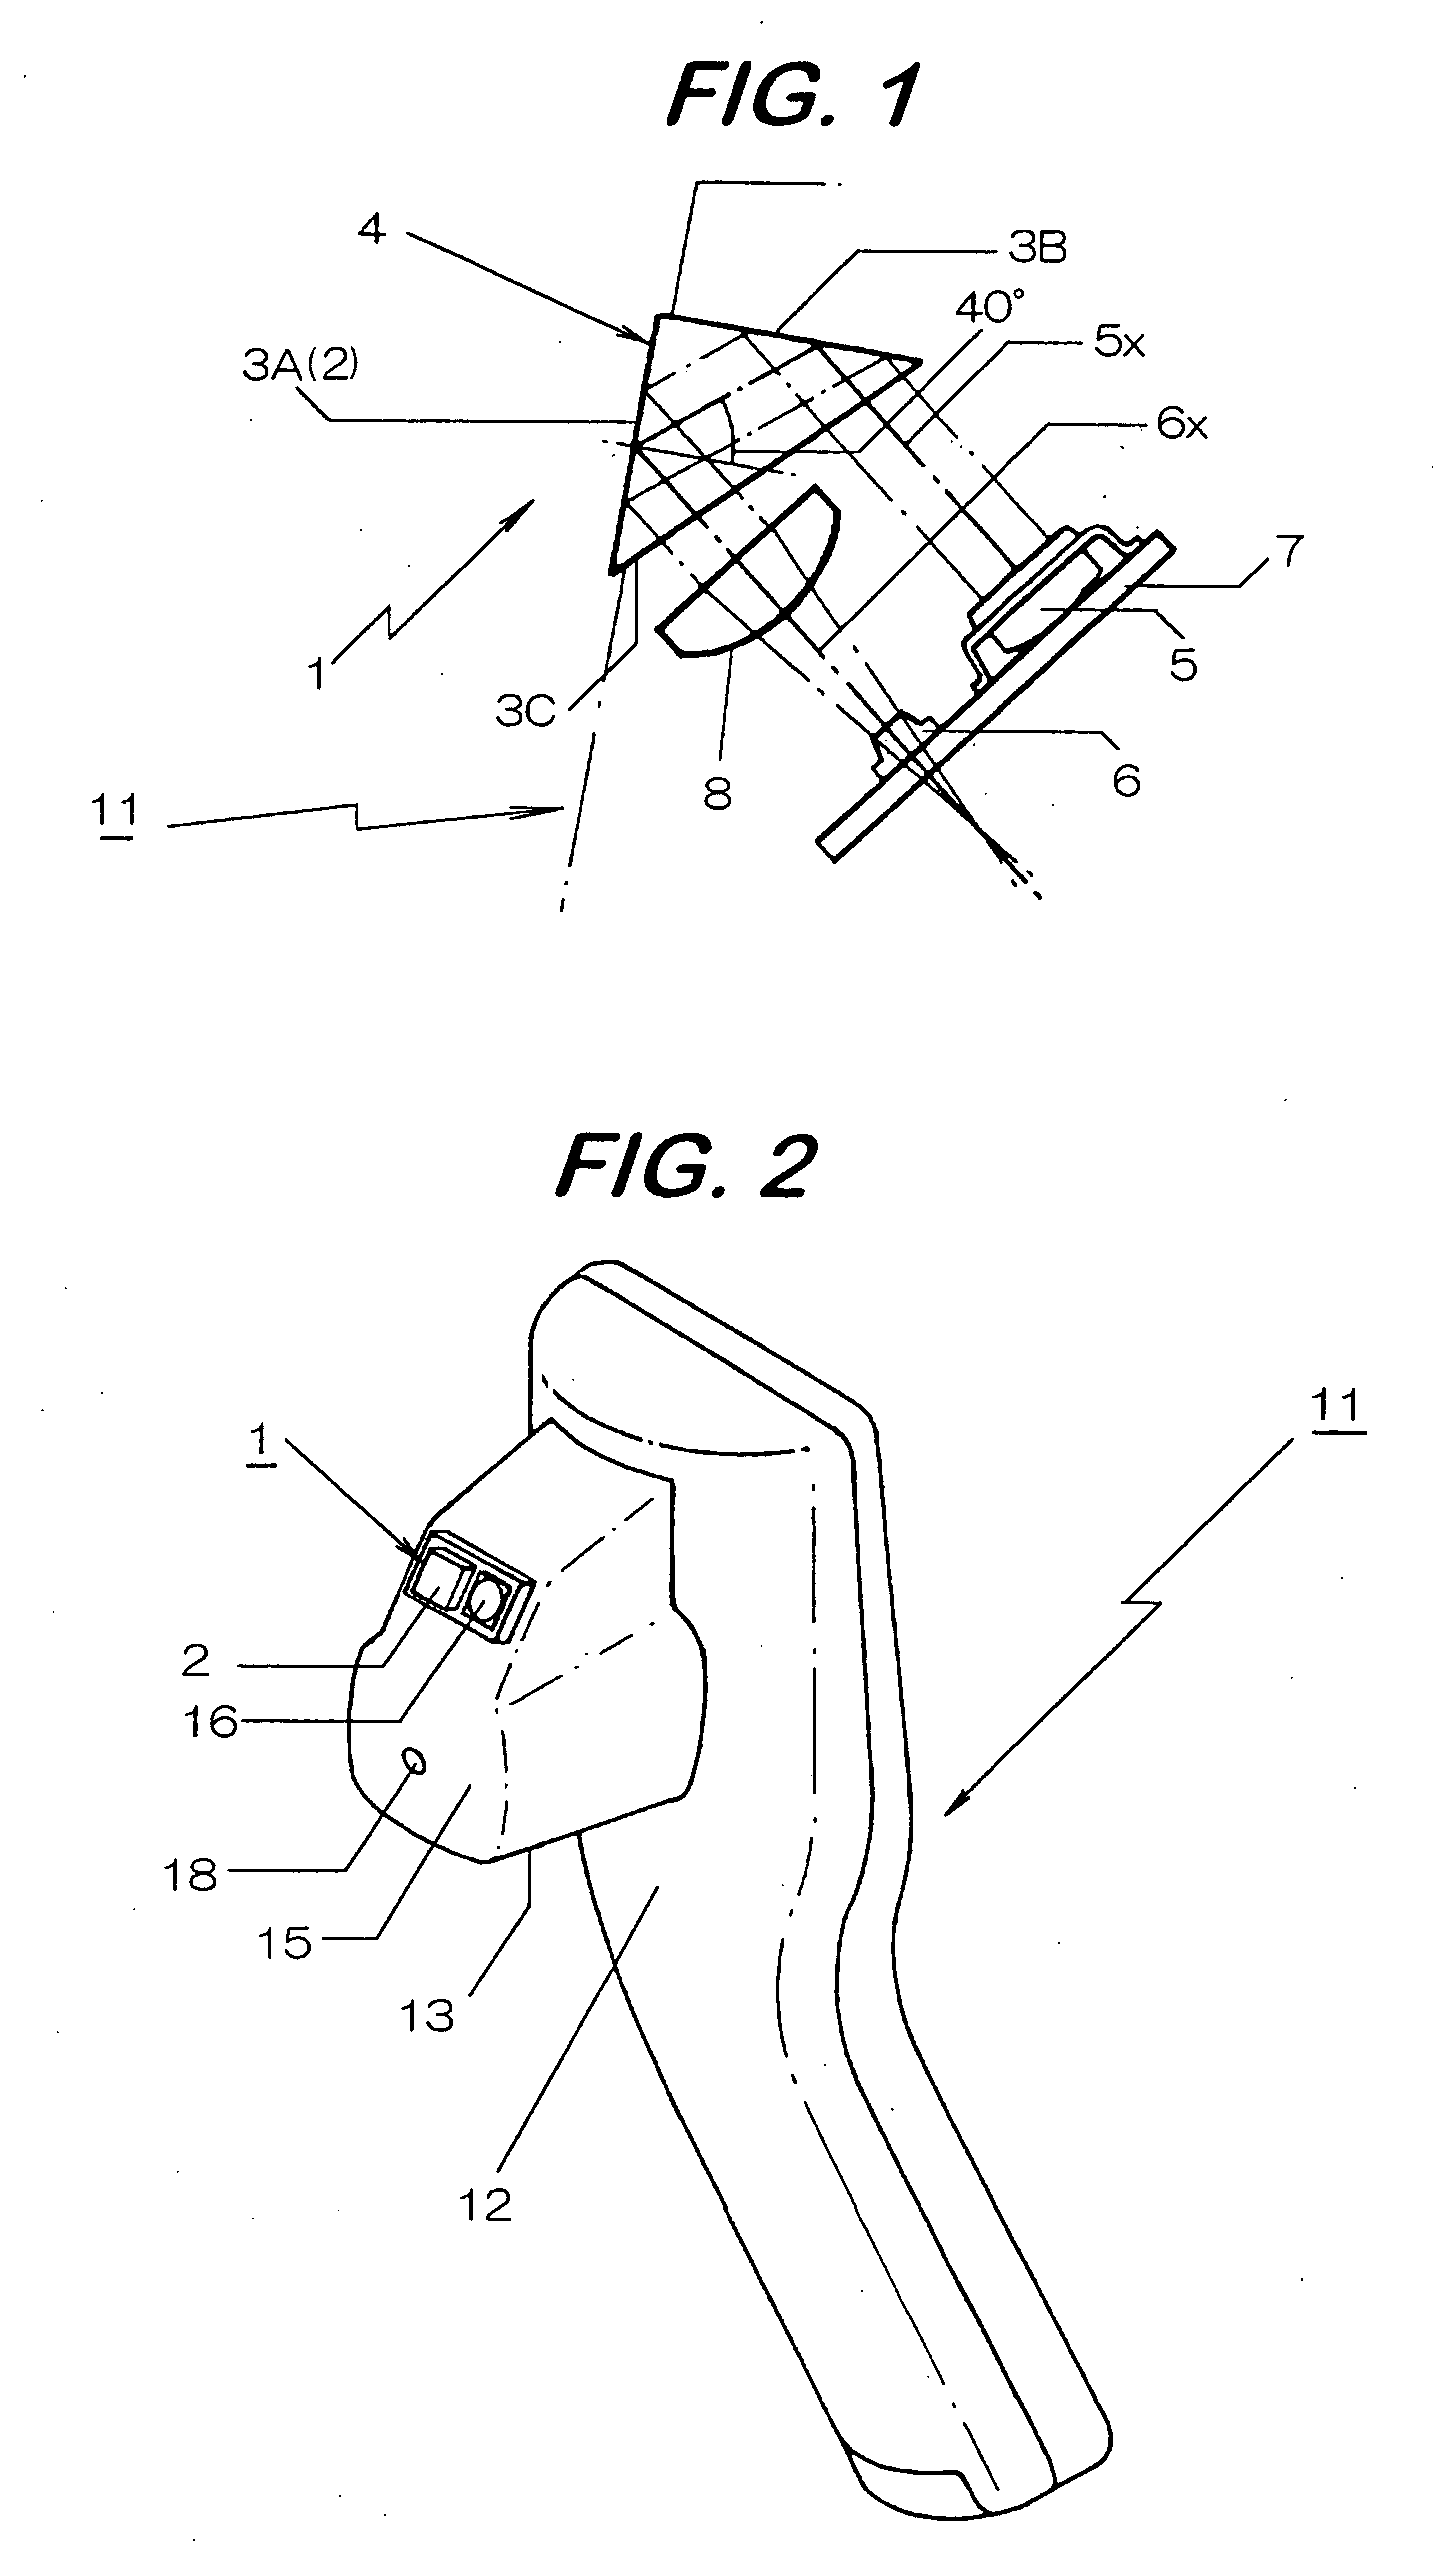 Skin condition observation apparatus